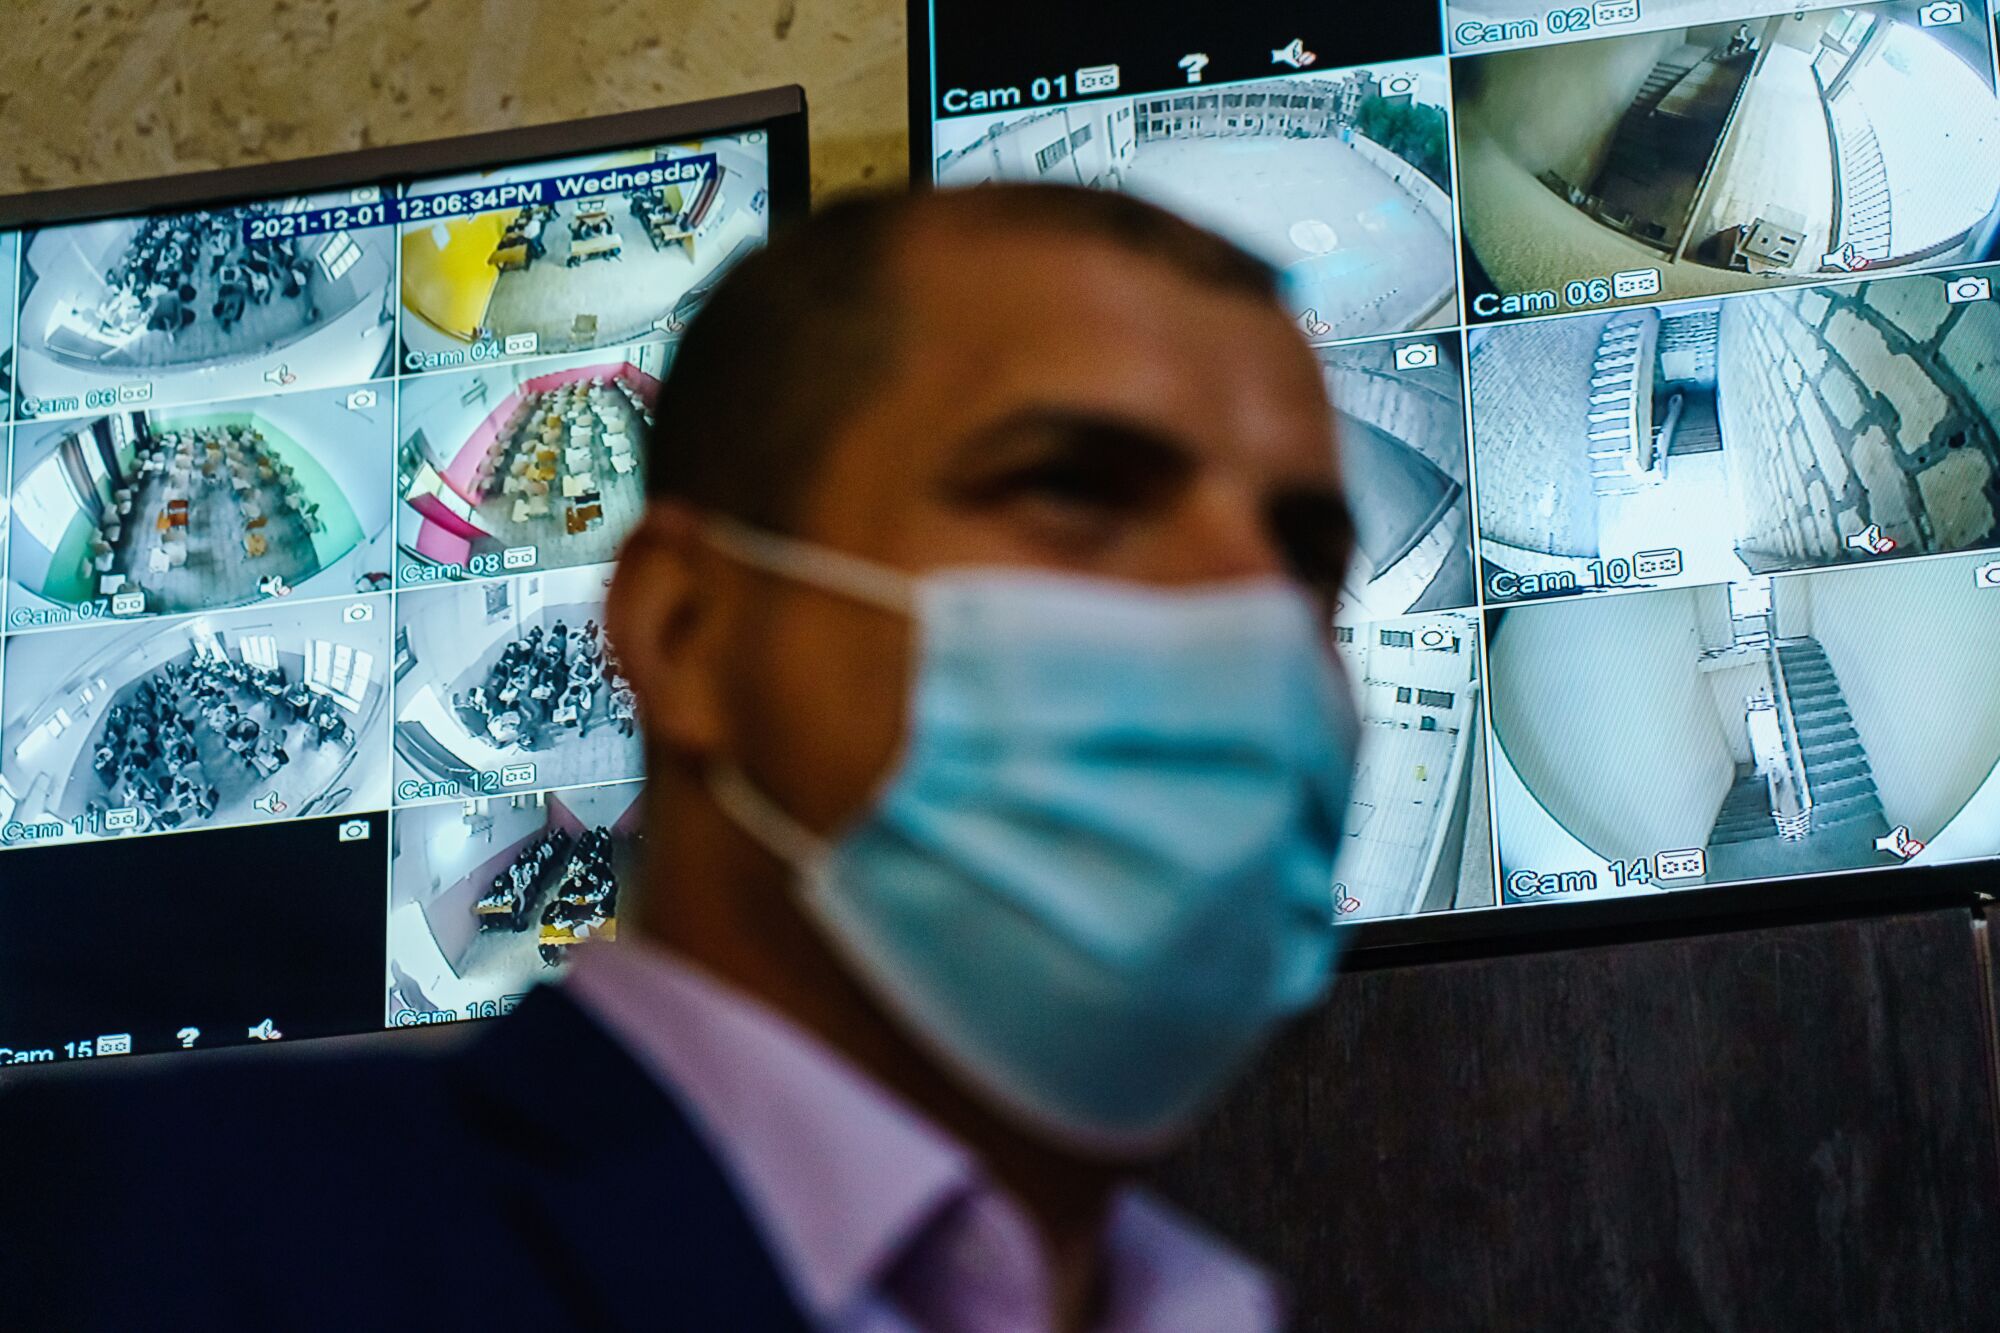  A man wearing a blue mask is shown with closed-circuit surveillance TV screens in the background